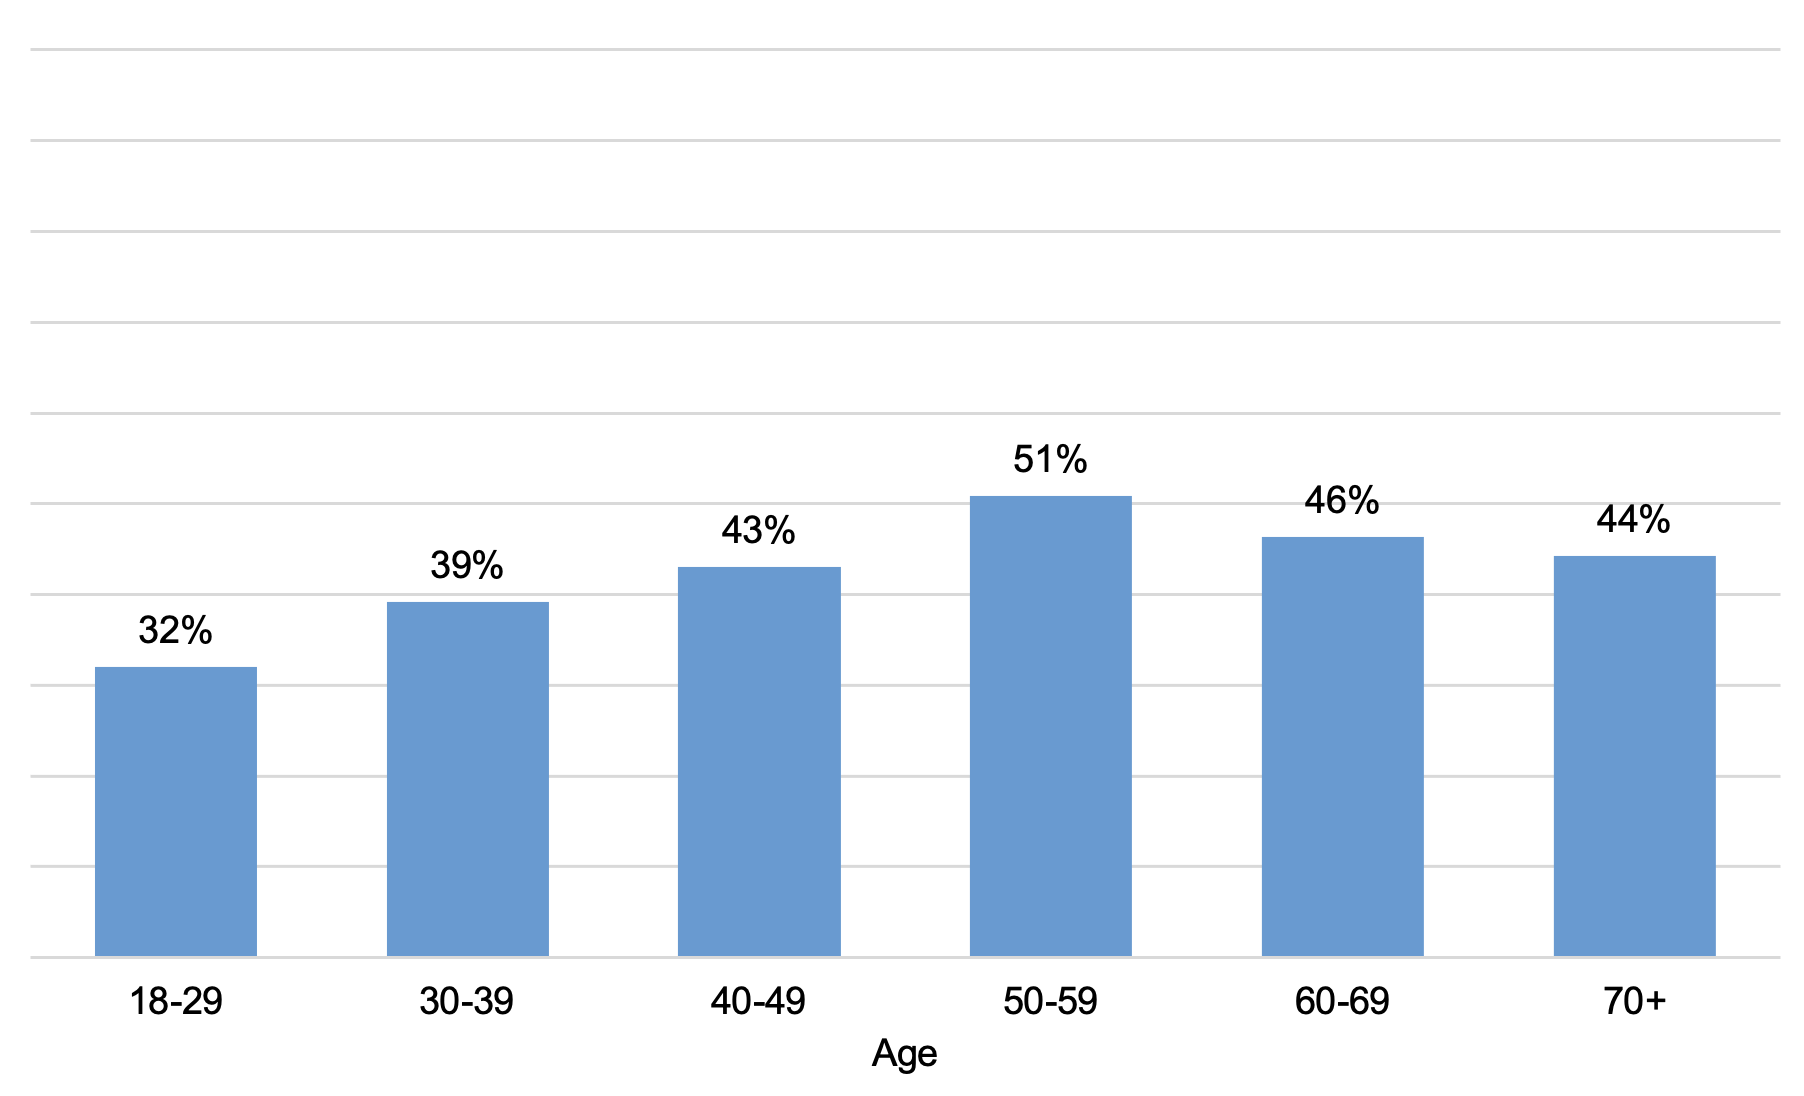 Figure 1 Percent of respondents answering all Big Three questions correctly, by age